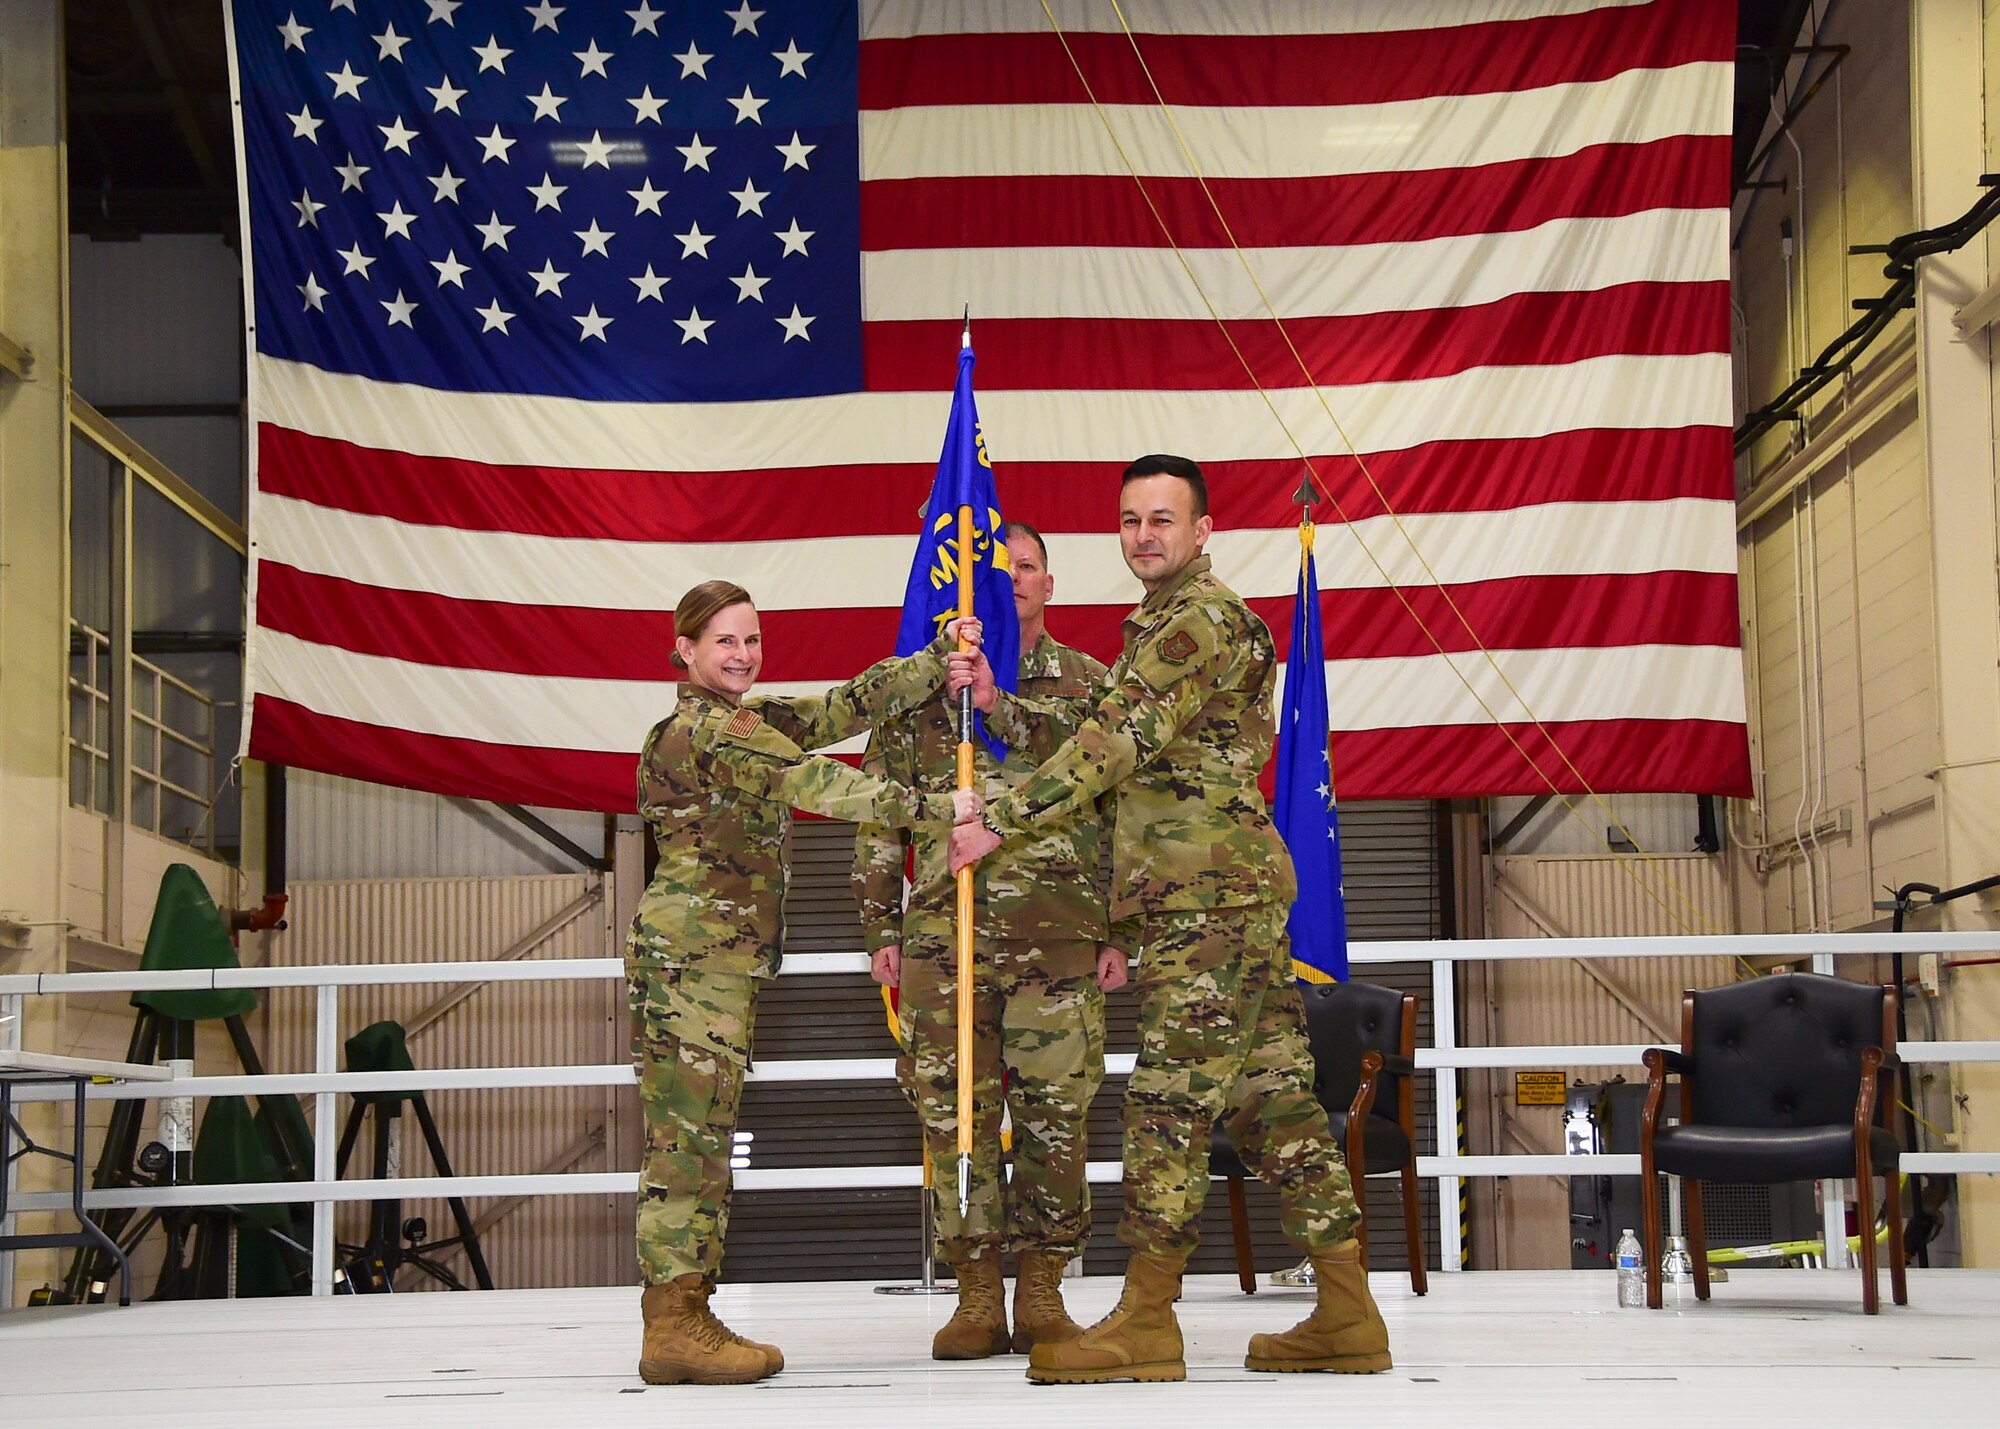 Col. Arianne Mayberry, 434th Maintenance Group commander, passes the guidon to Maj. Bradley Palm, 434th Maintenance Squadron commander, during an assumption of command ceremony at Grissom Air Reserve Base, Ind. Feb. 7, 2021. Palm assumed command of the 434th MXS from Lt. Col. Nicole Fink. (U.S. Air Force photo by Staff Sgt. Chris Massey)